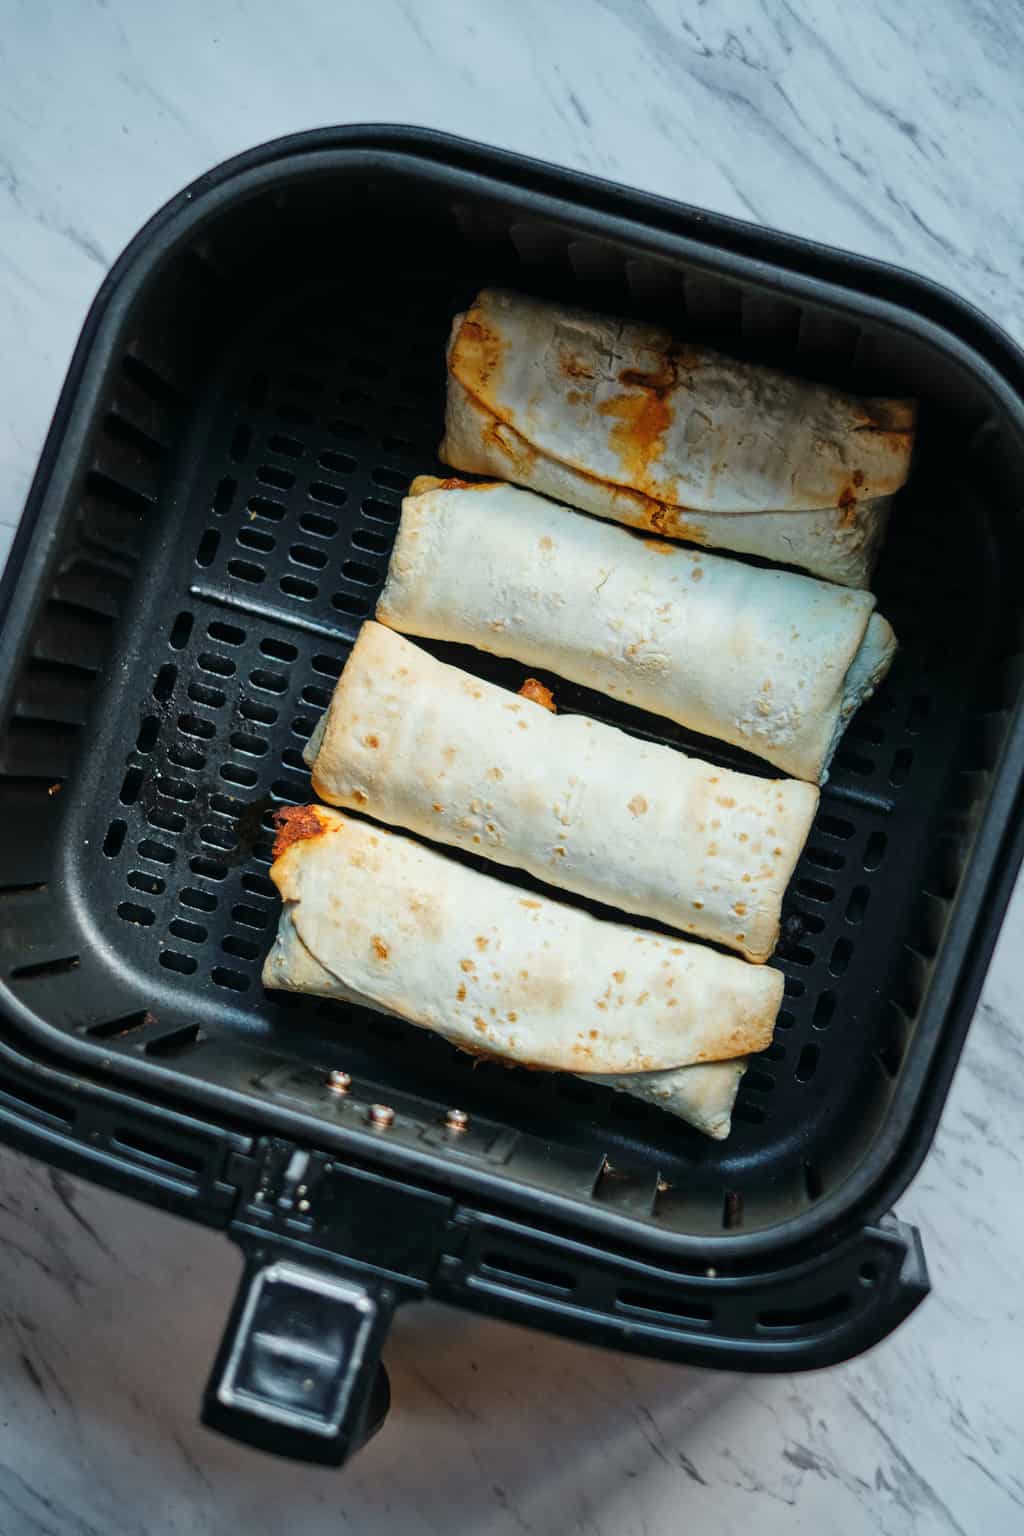 Reheat a Burrito in the Air Fryer